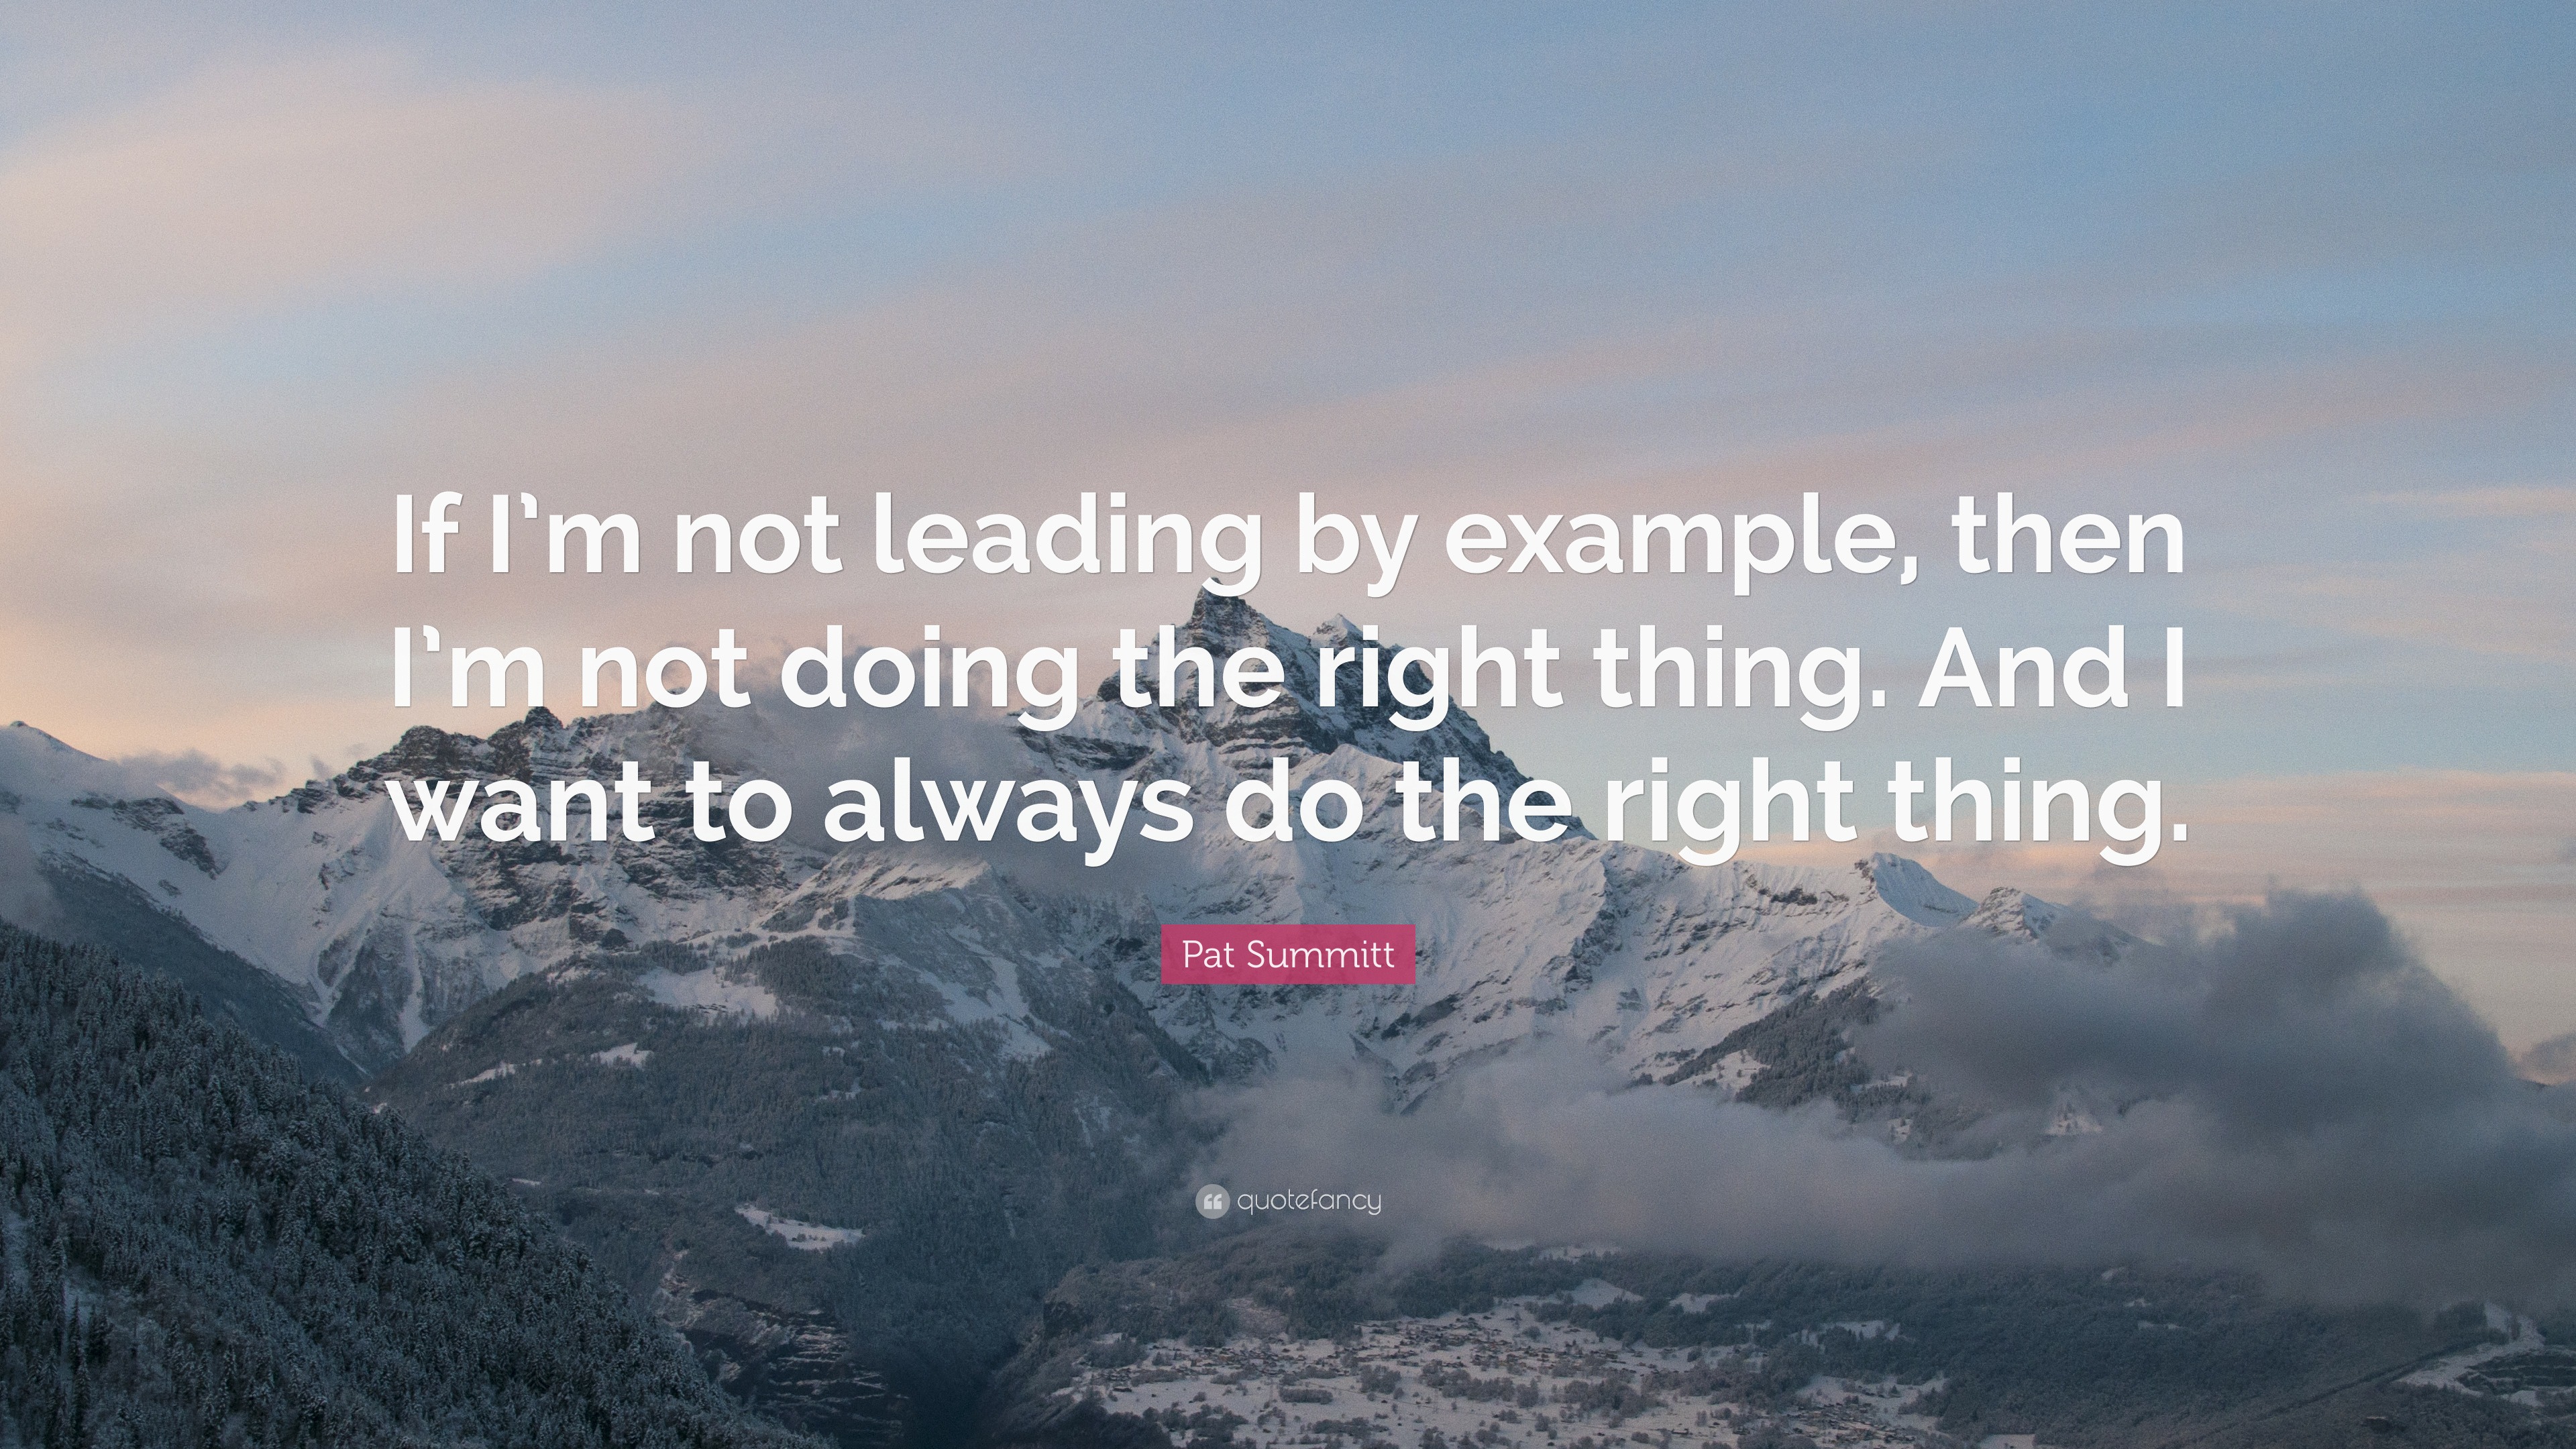 Pat Summitt Quote: “If I’m not leading by example, then I’m not doing ...